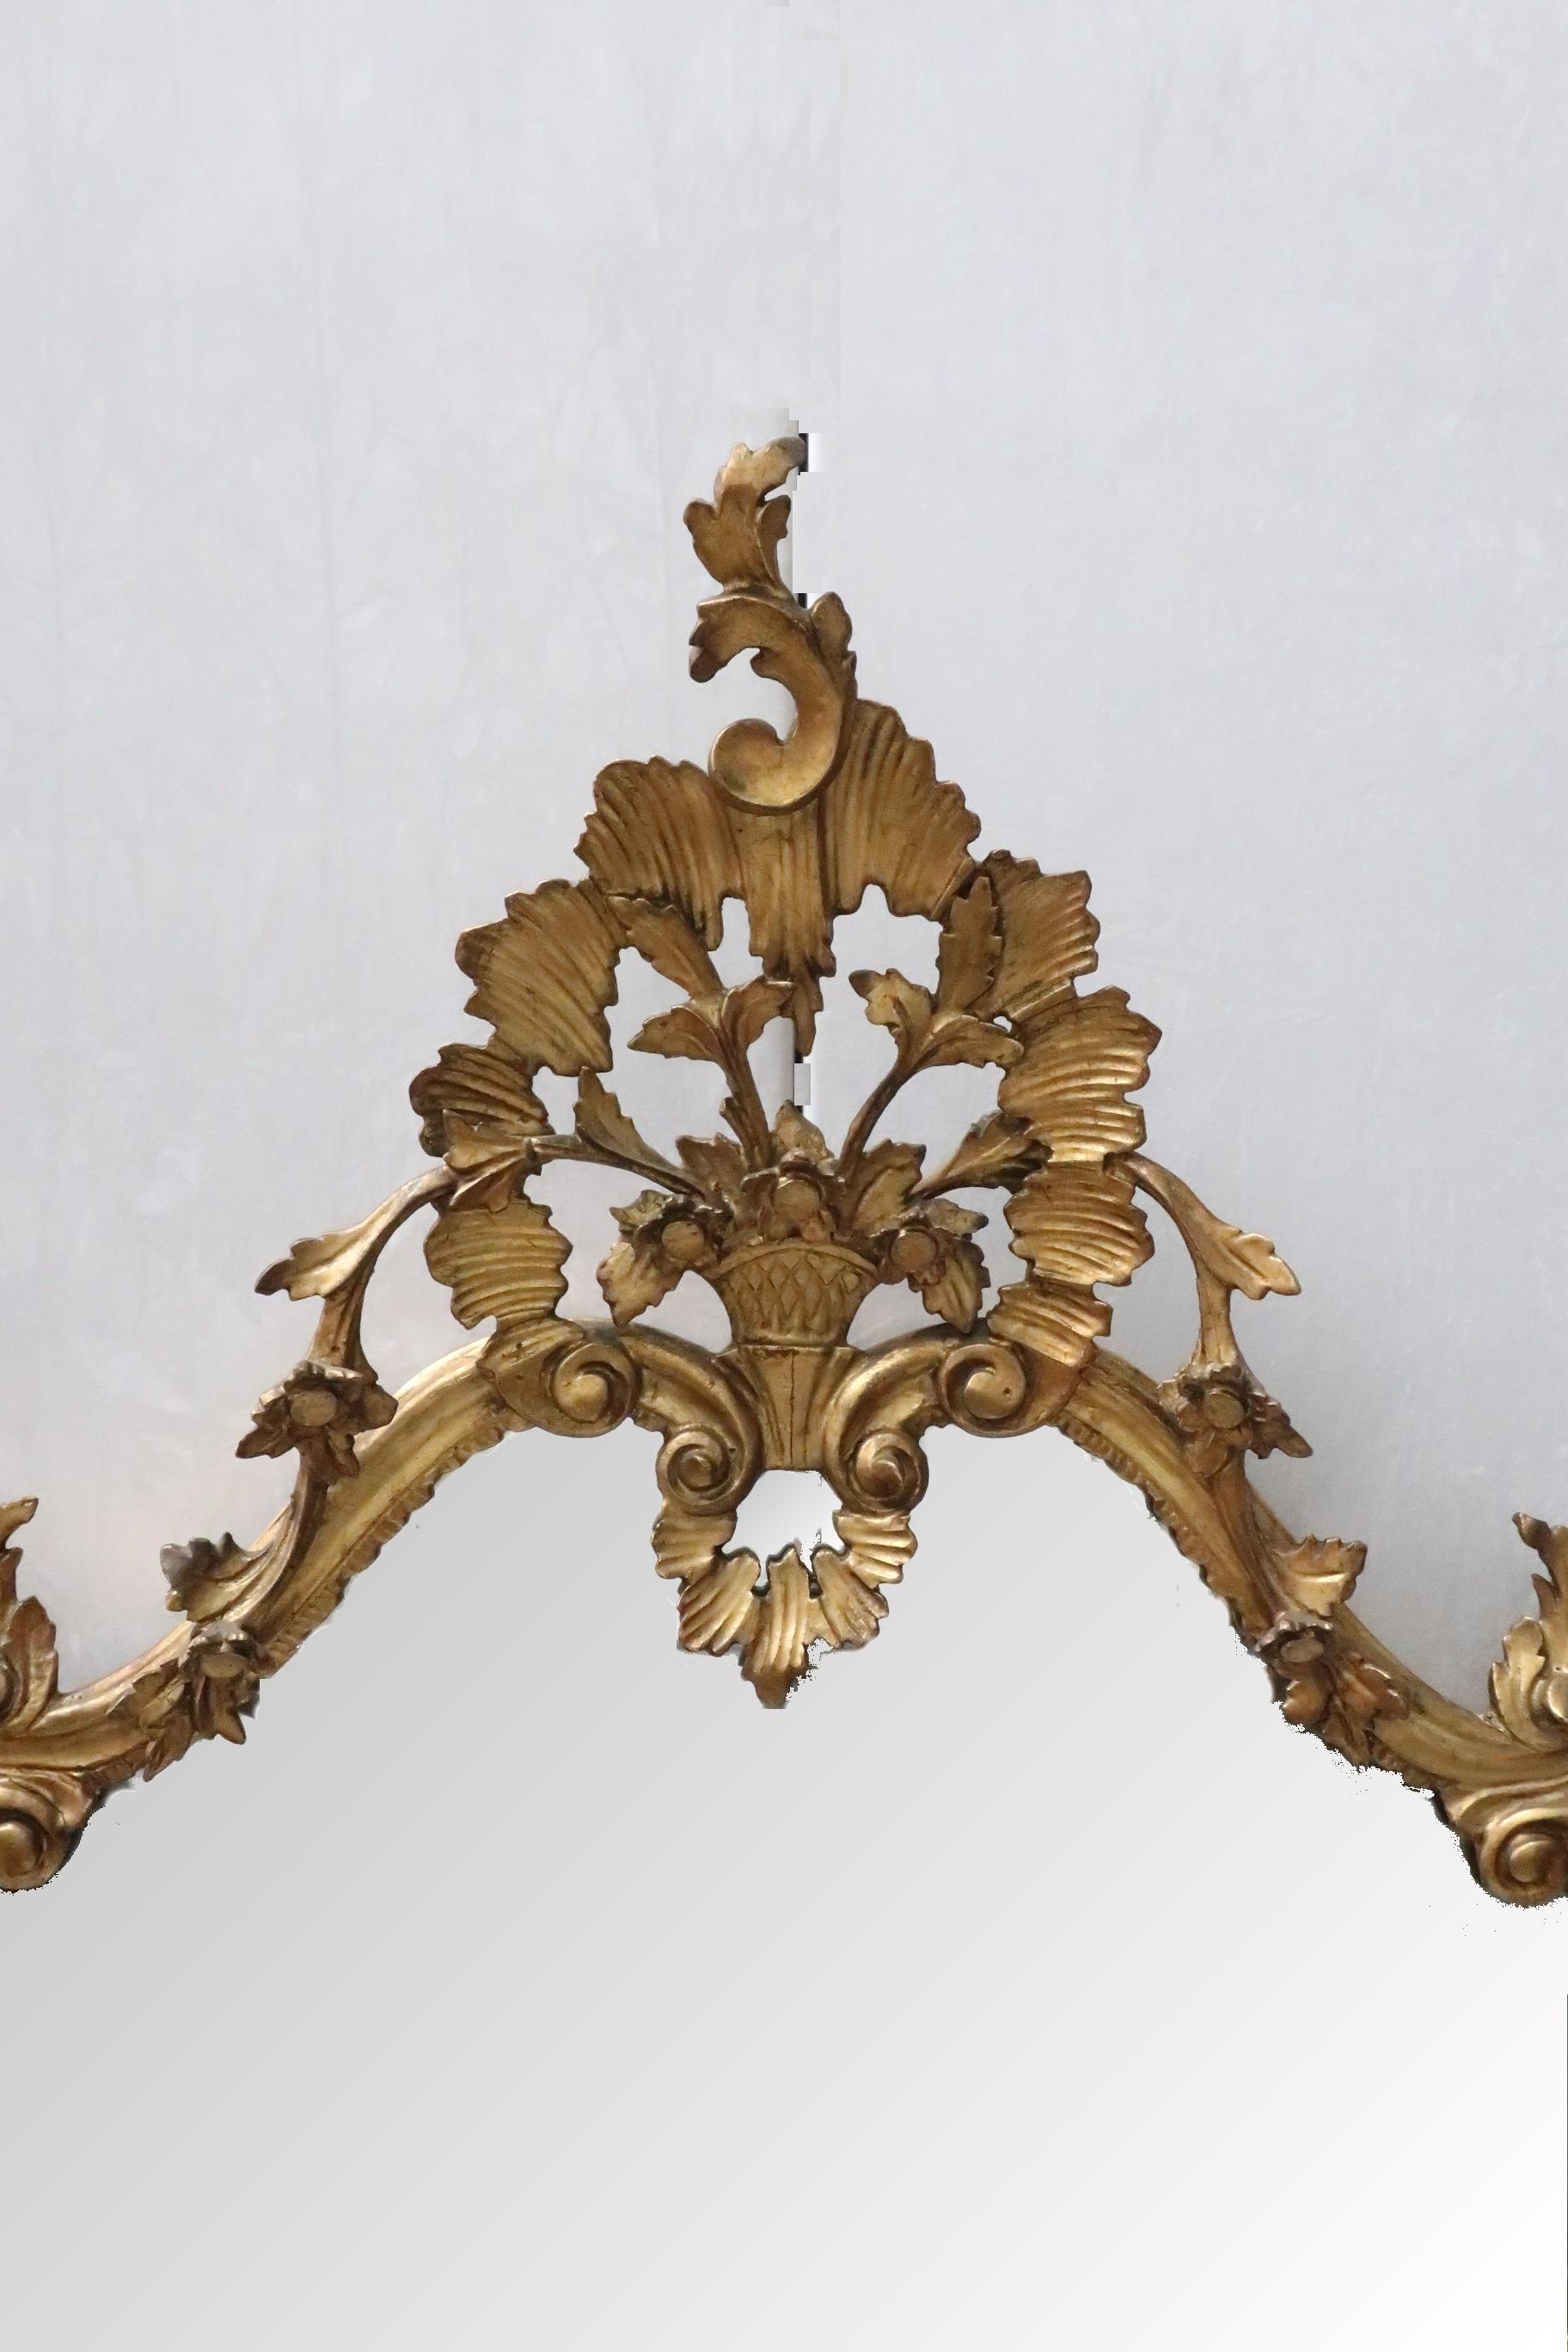 An extremely good quality Italian carved wooden gilt wall mirror with scrolling floral leaf design throughout still retaining its original gilding which is in excellent condition. The mirror also retains its original mirror plate which is in very